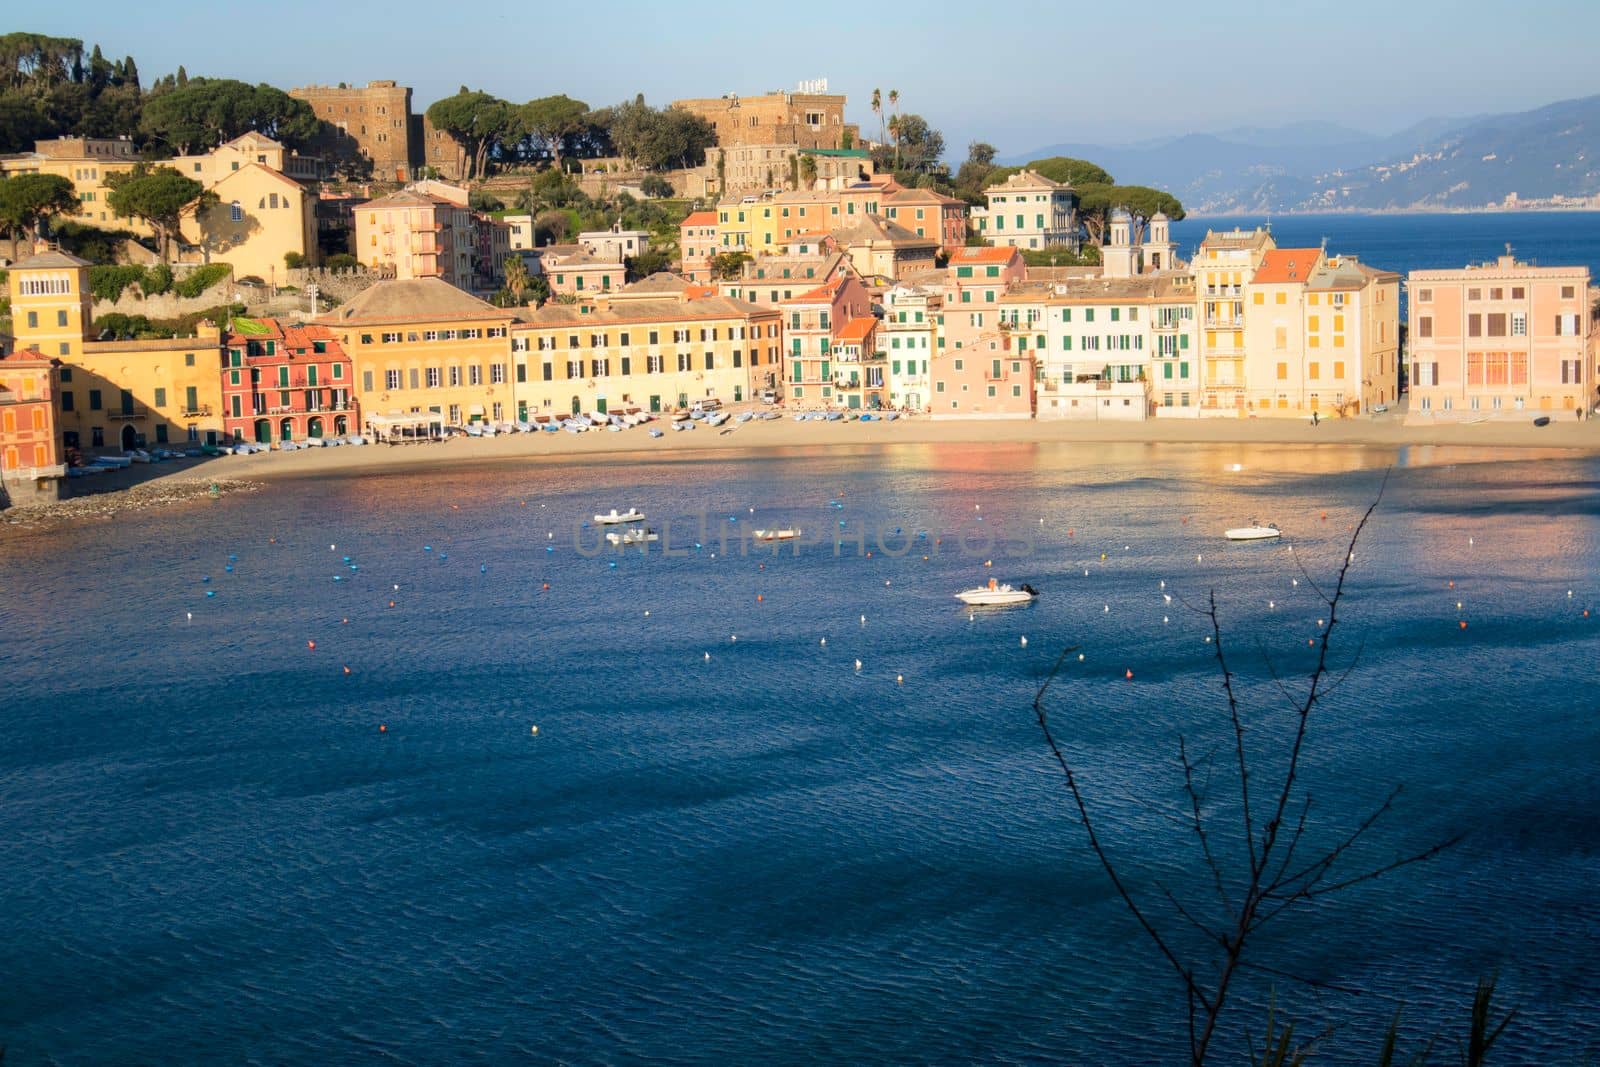 Photographic documentation of the Bay of Silence in Sestri Levante Italy taken at dawn 